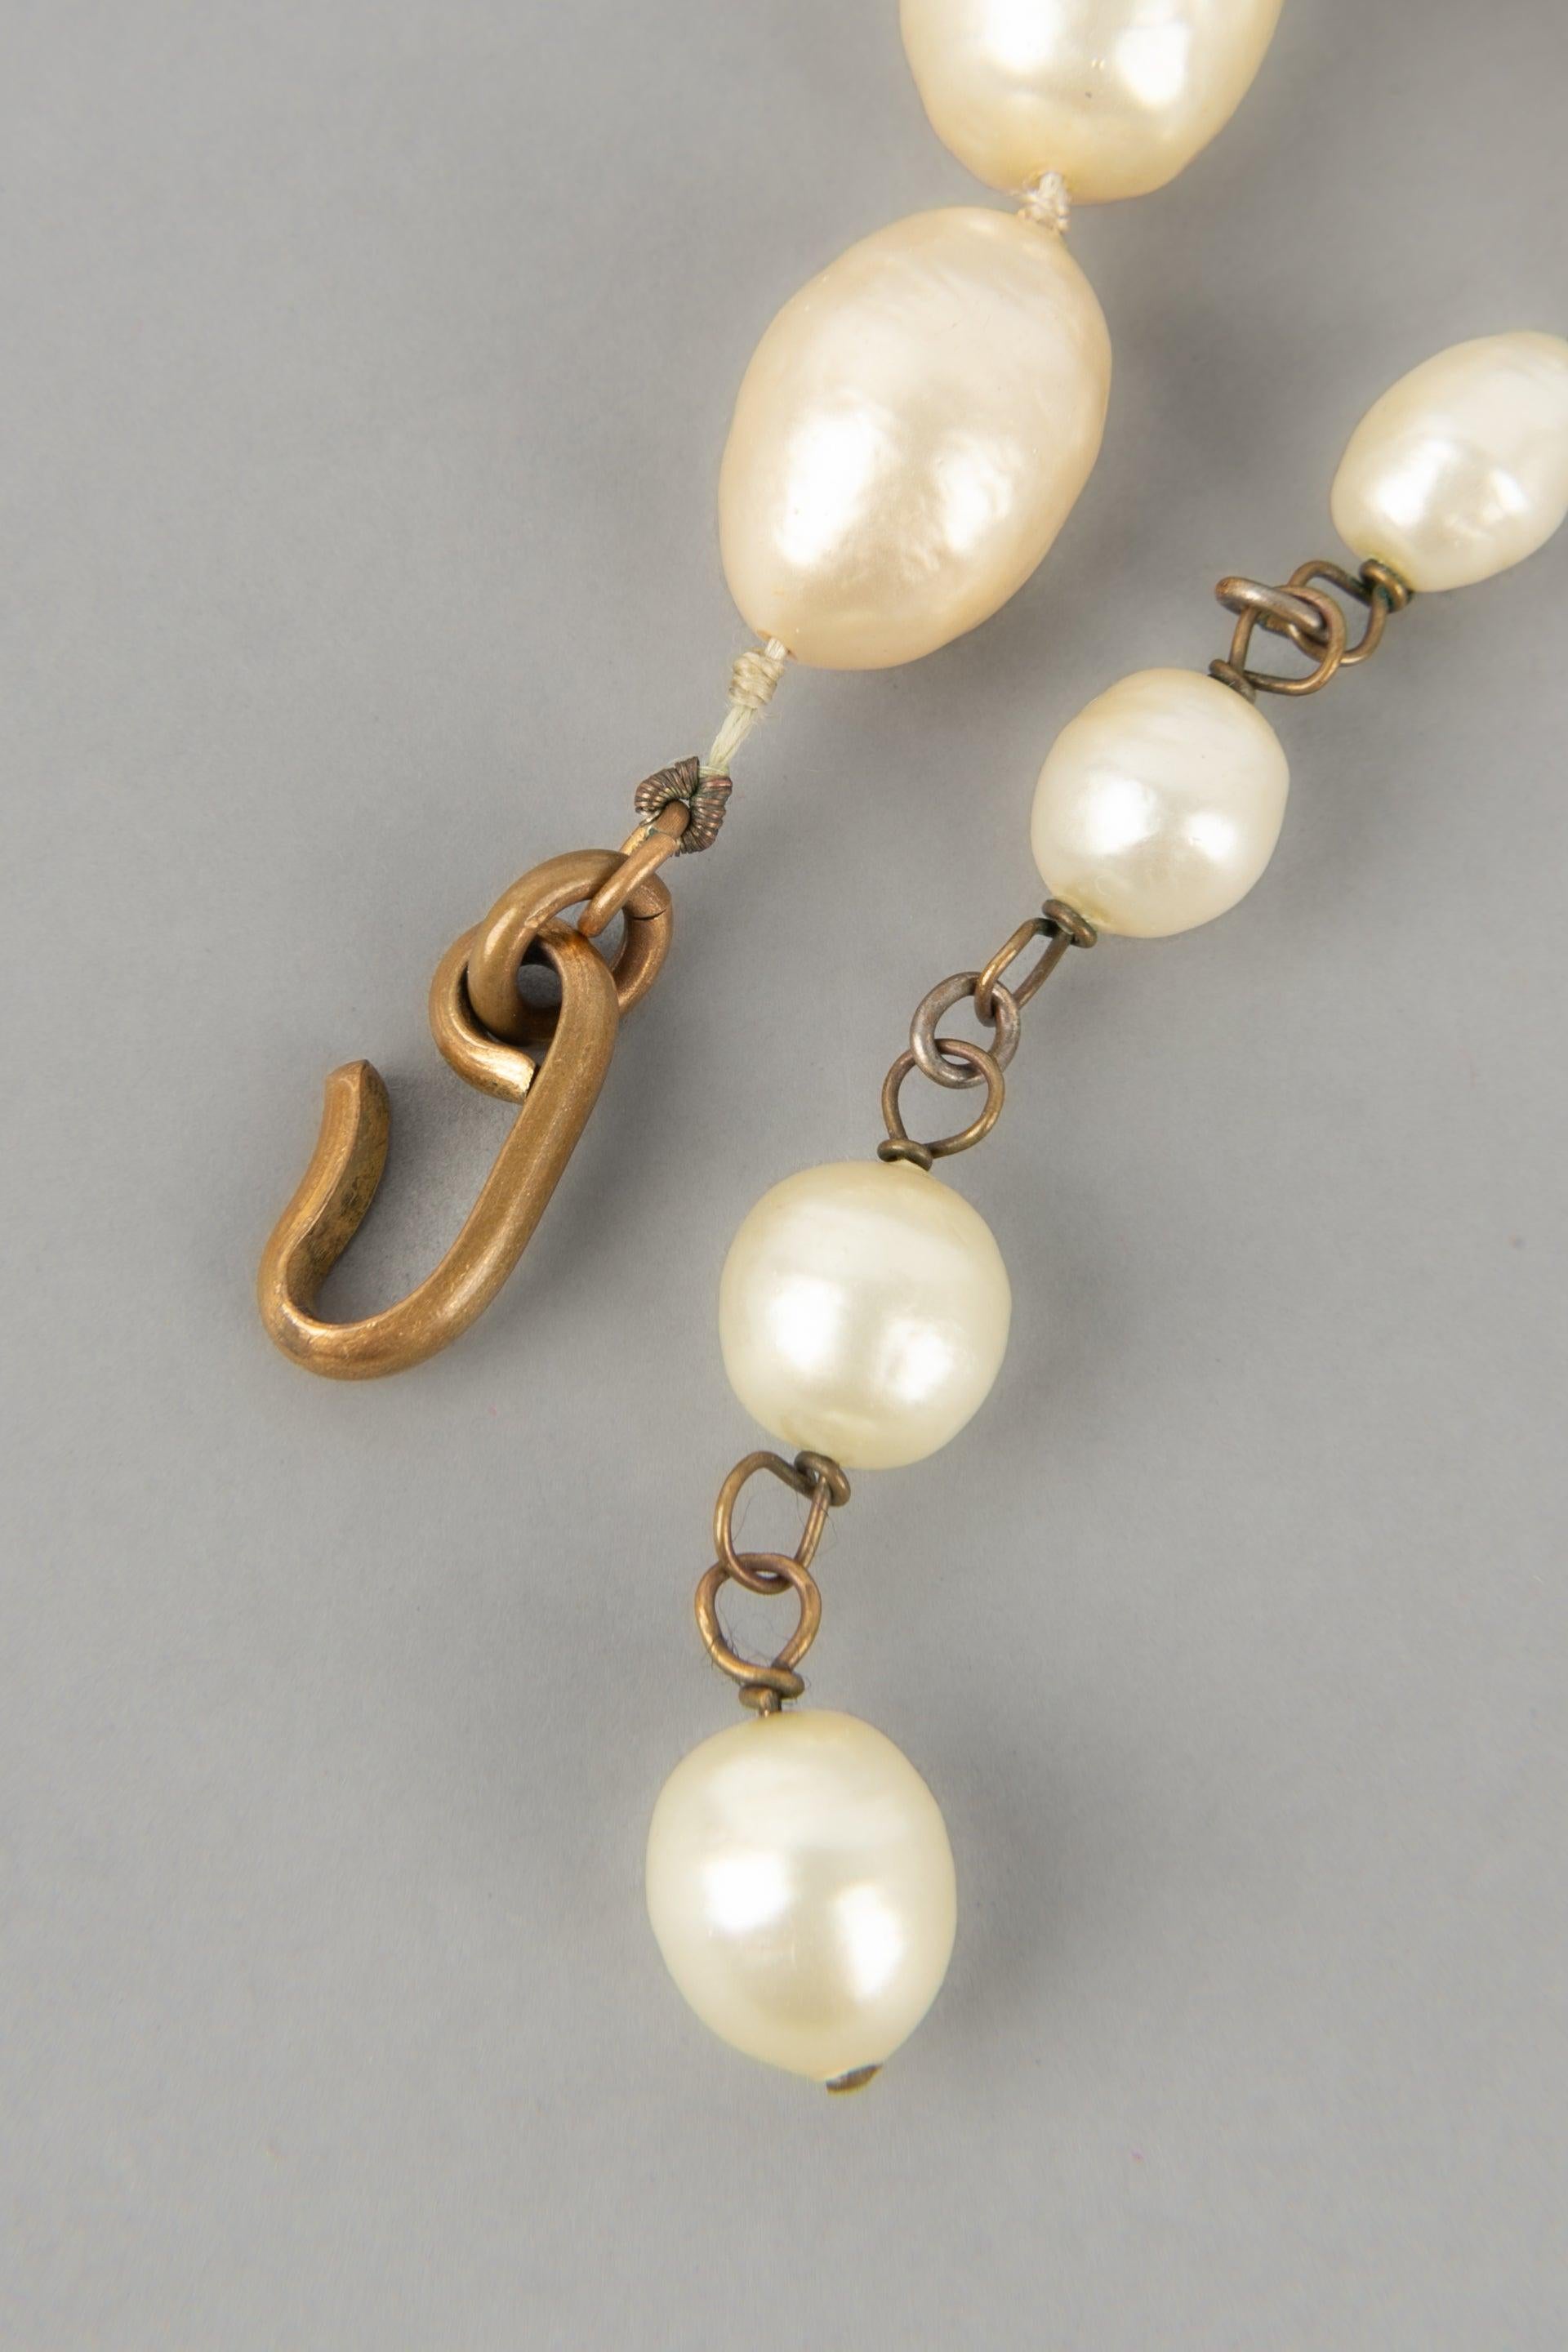 Chanel Costume Pearl Necklace with a Golden Metal Pendant, 1983 For Sale 2